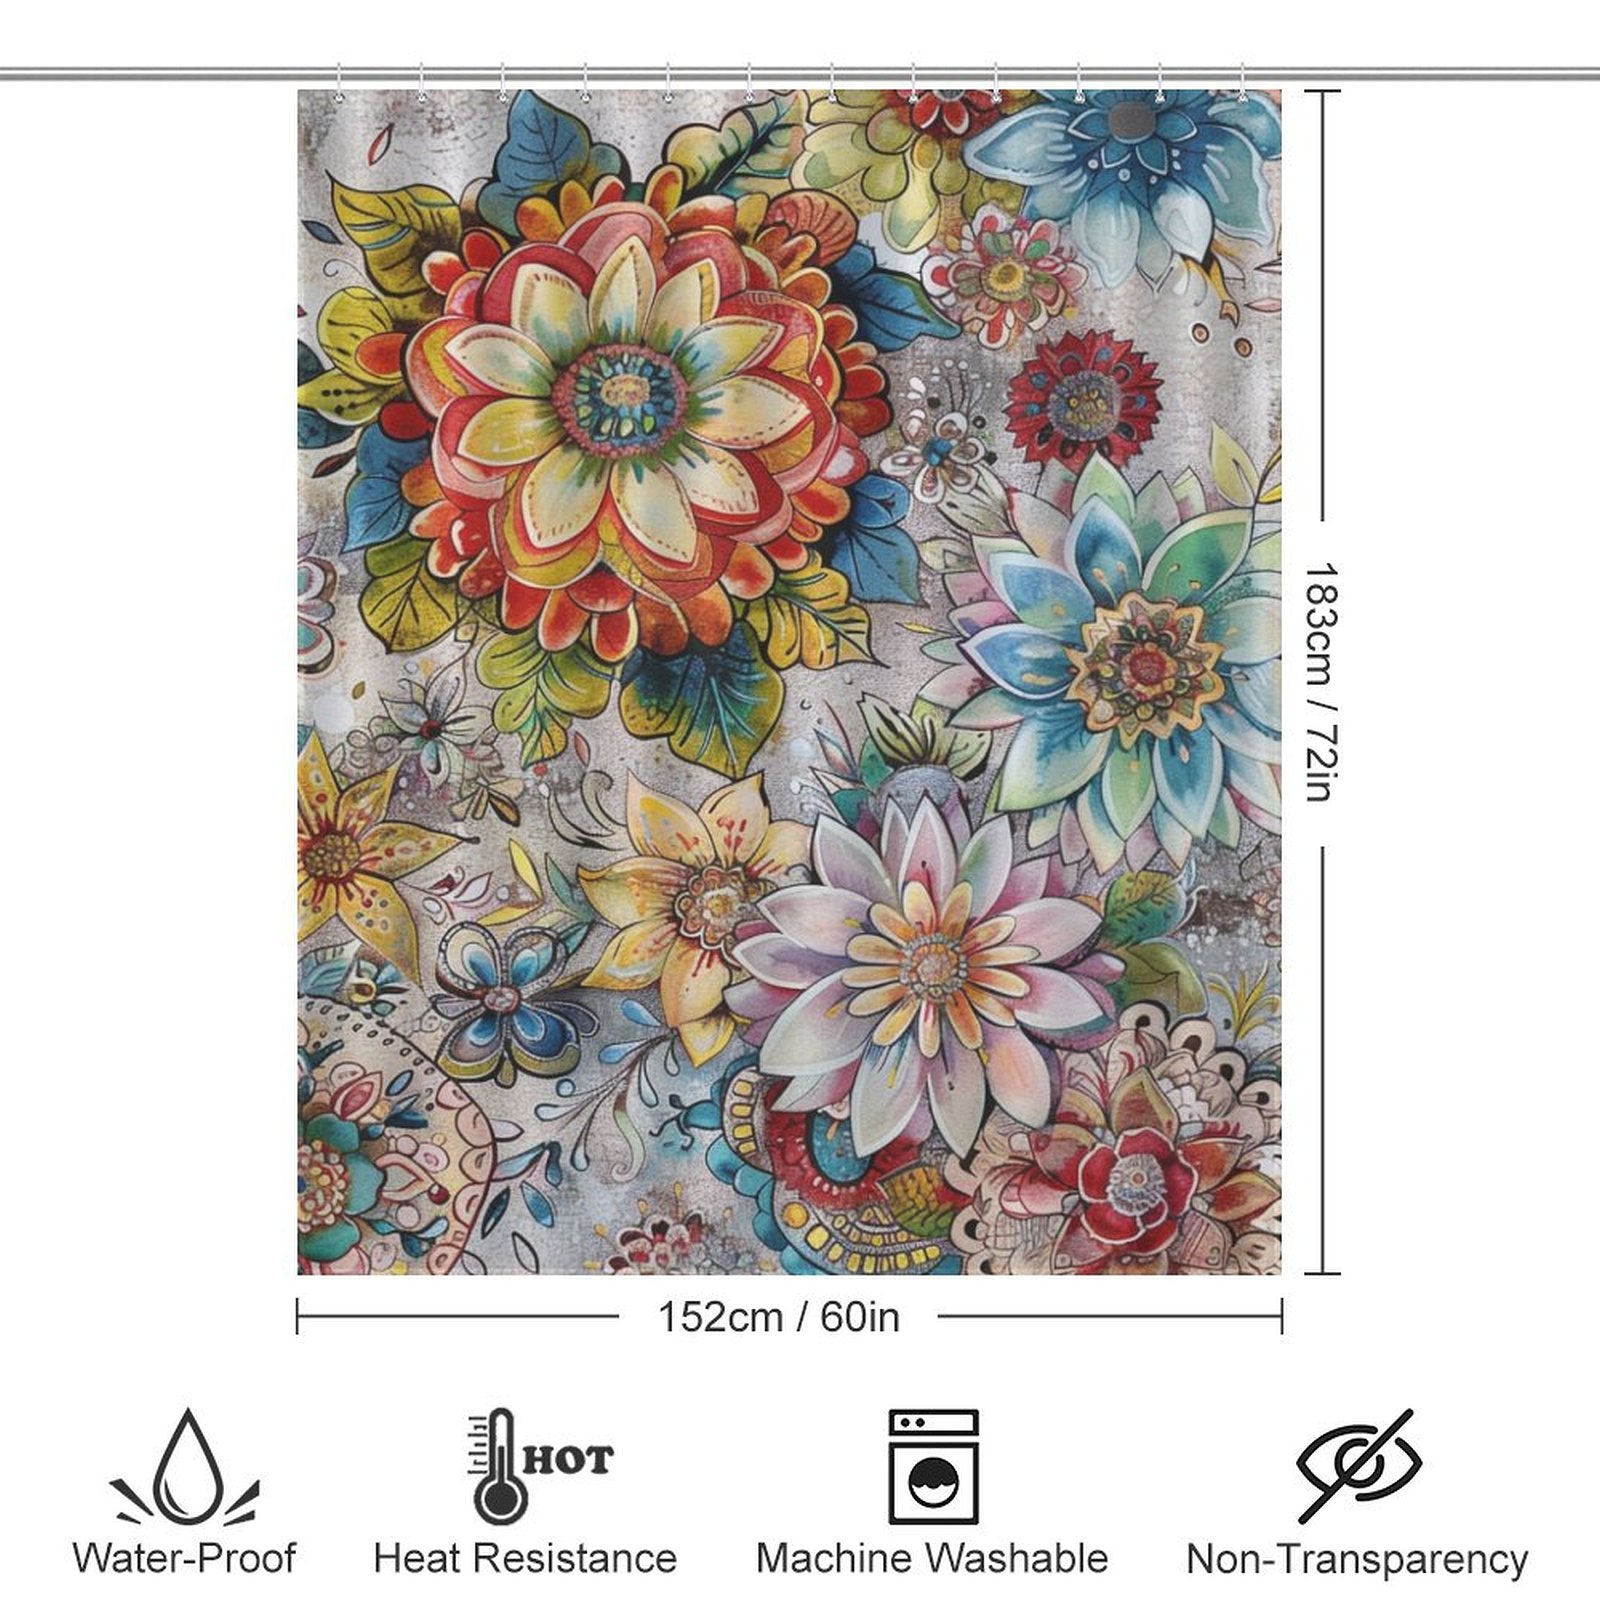 Watercolor Floral Boho Shower Curtain